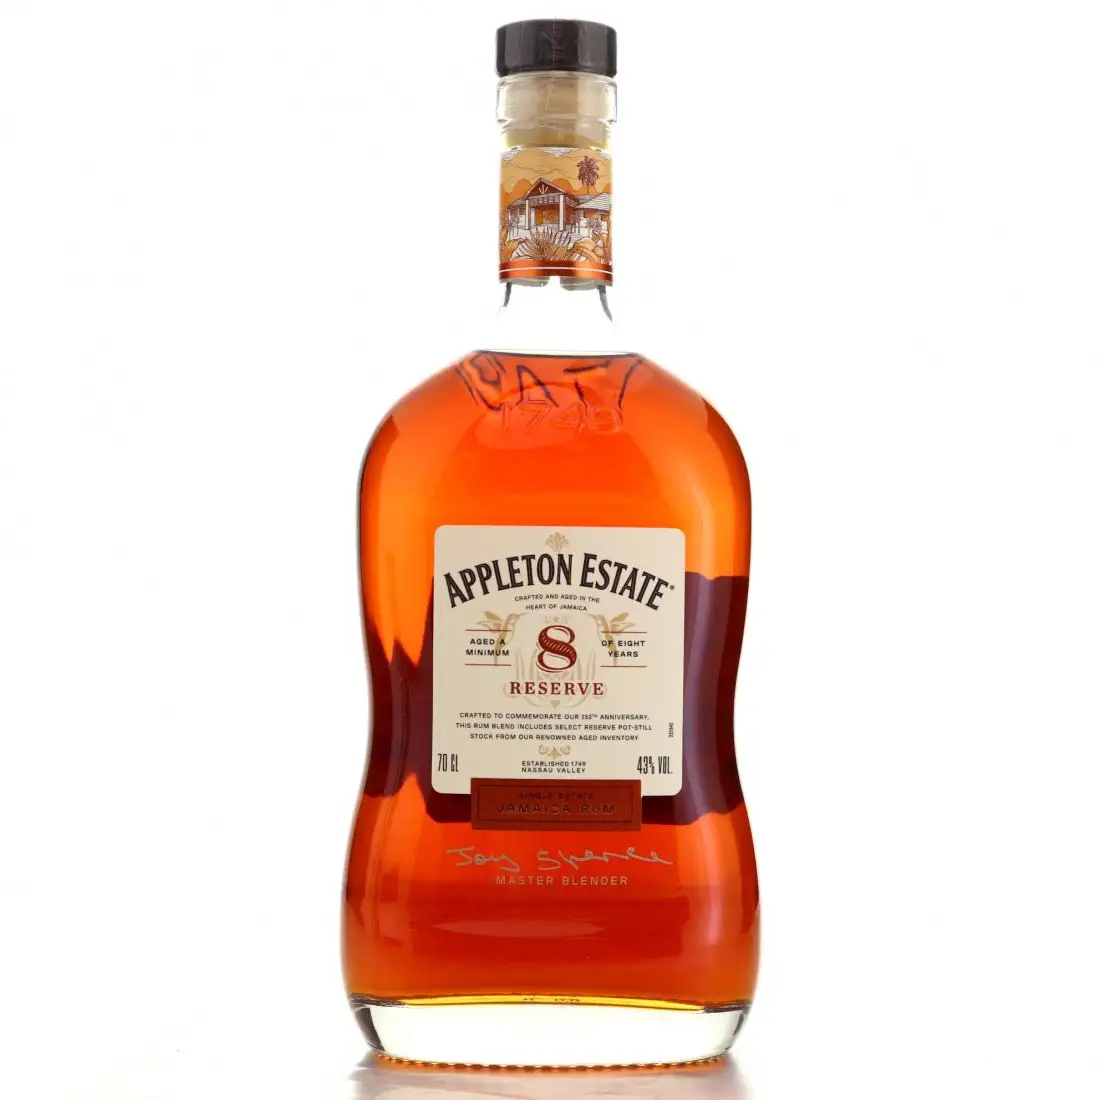 Image of the front of the bottle of the rum Reserve